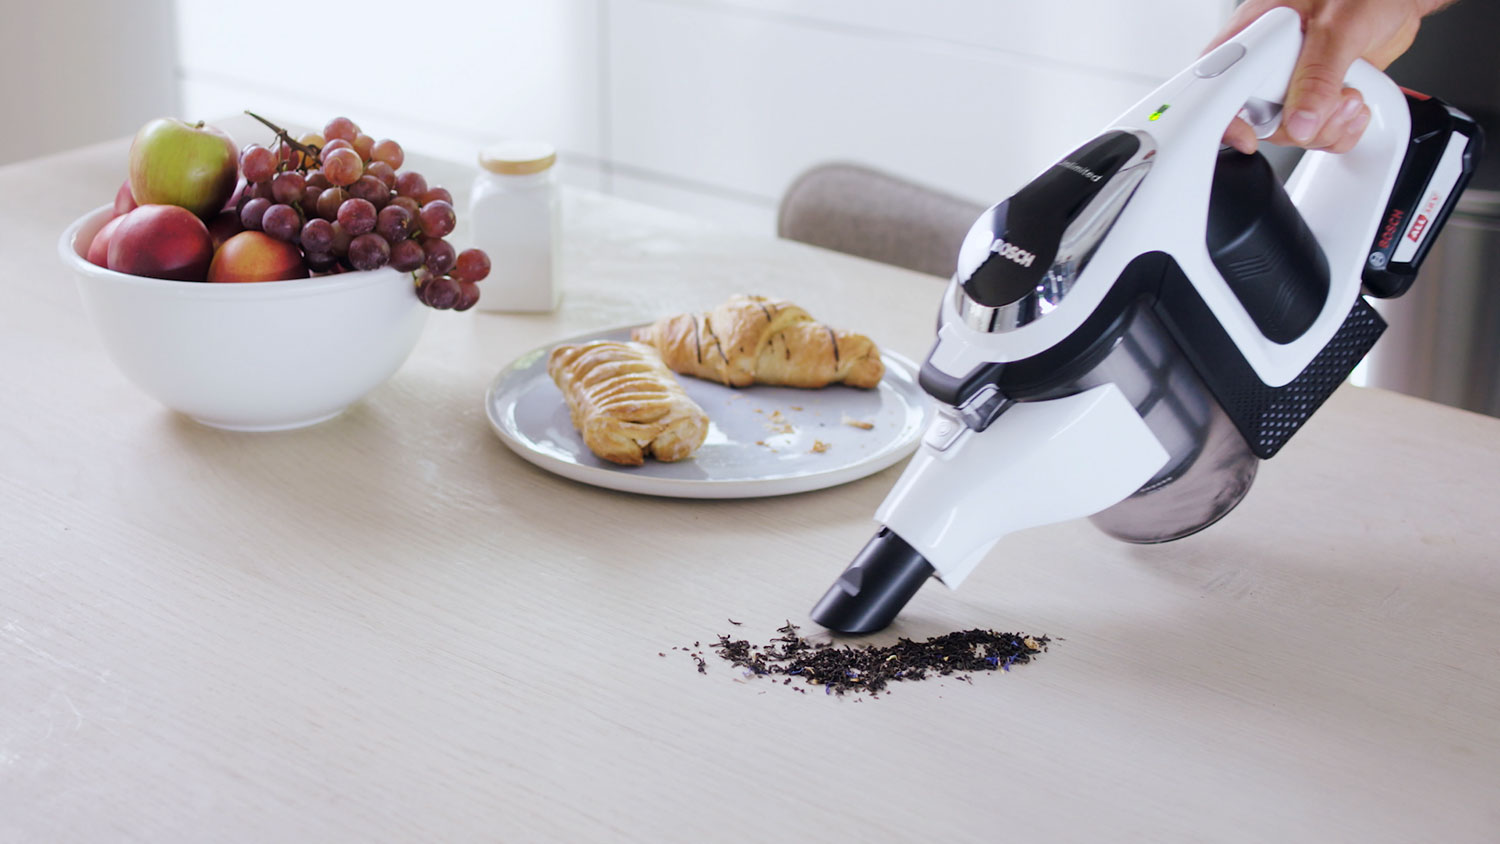 Bosch Launches Unlimited Cordless Vacuum Cleaner